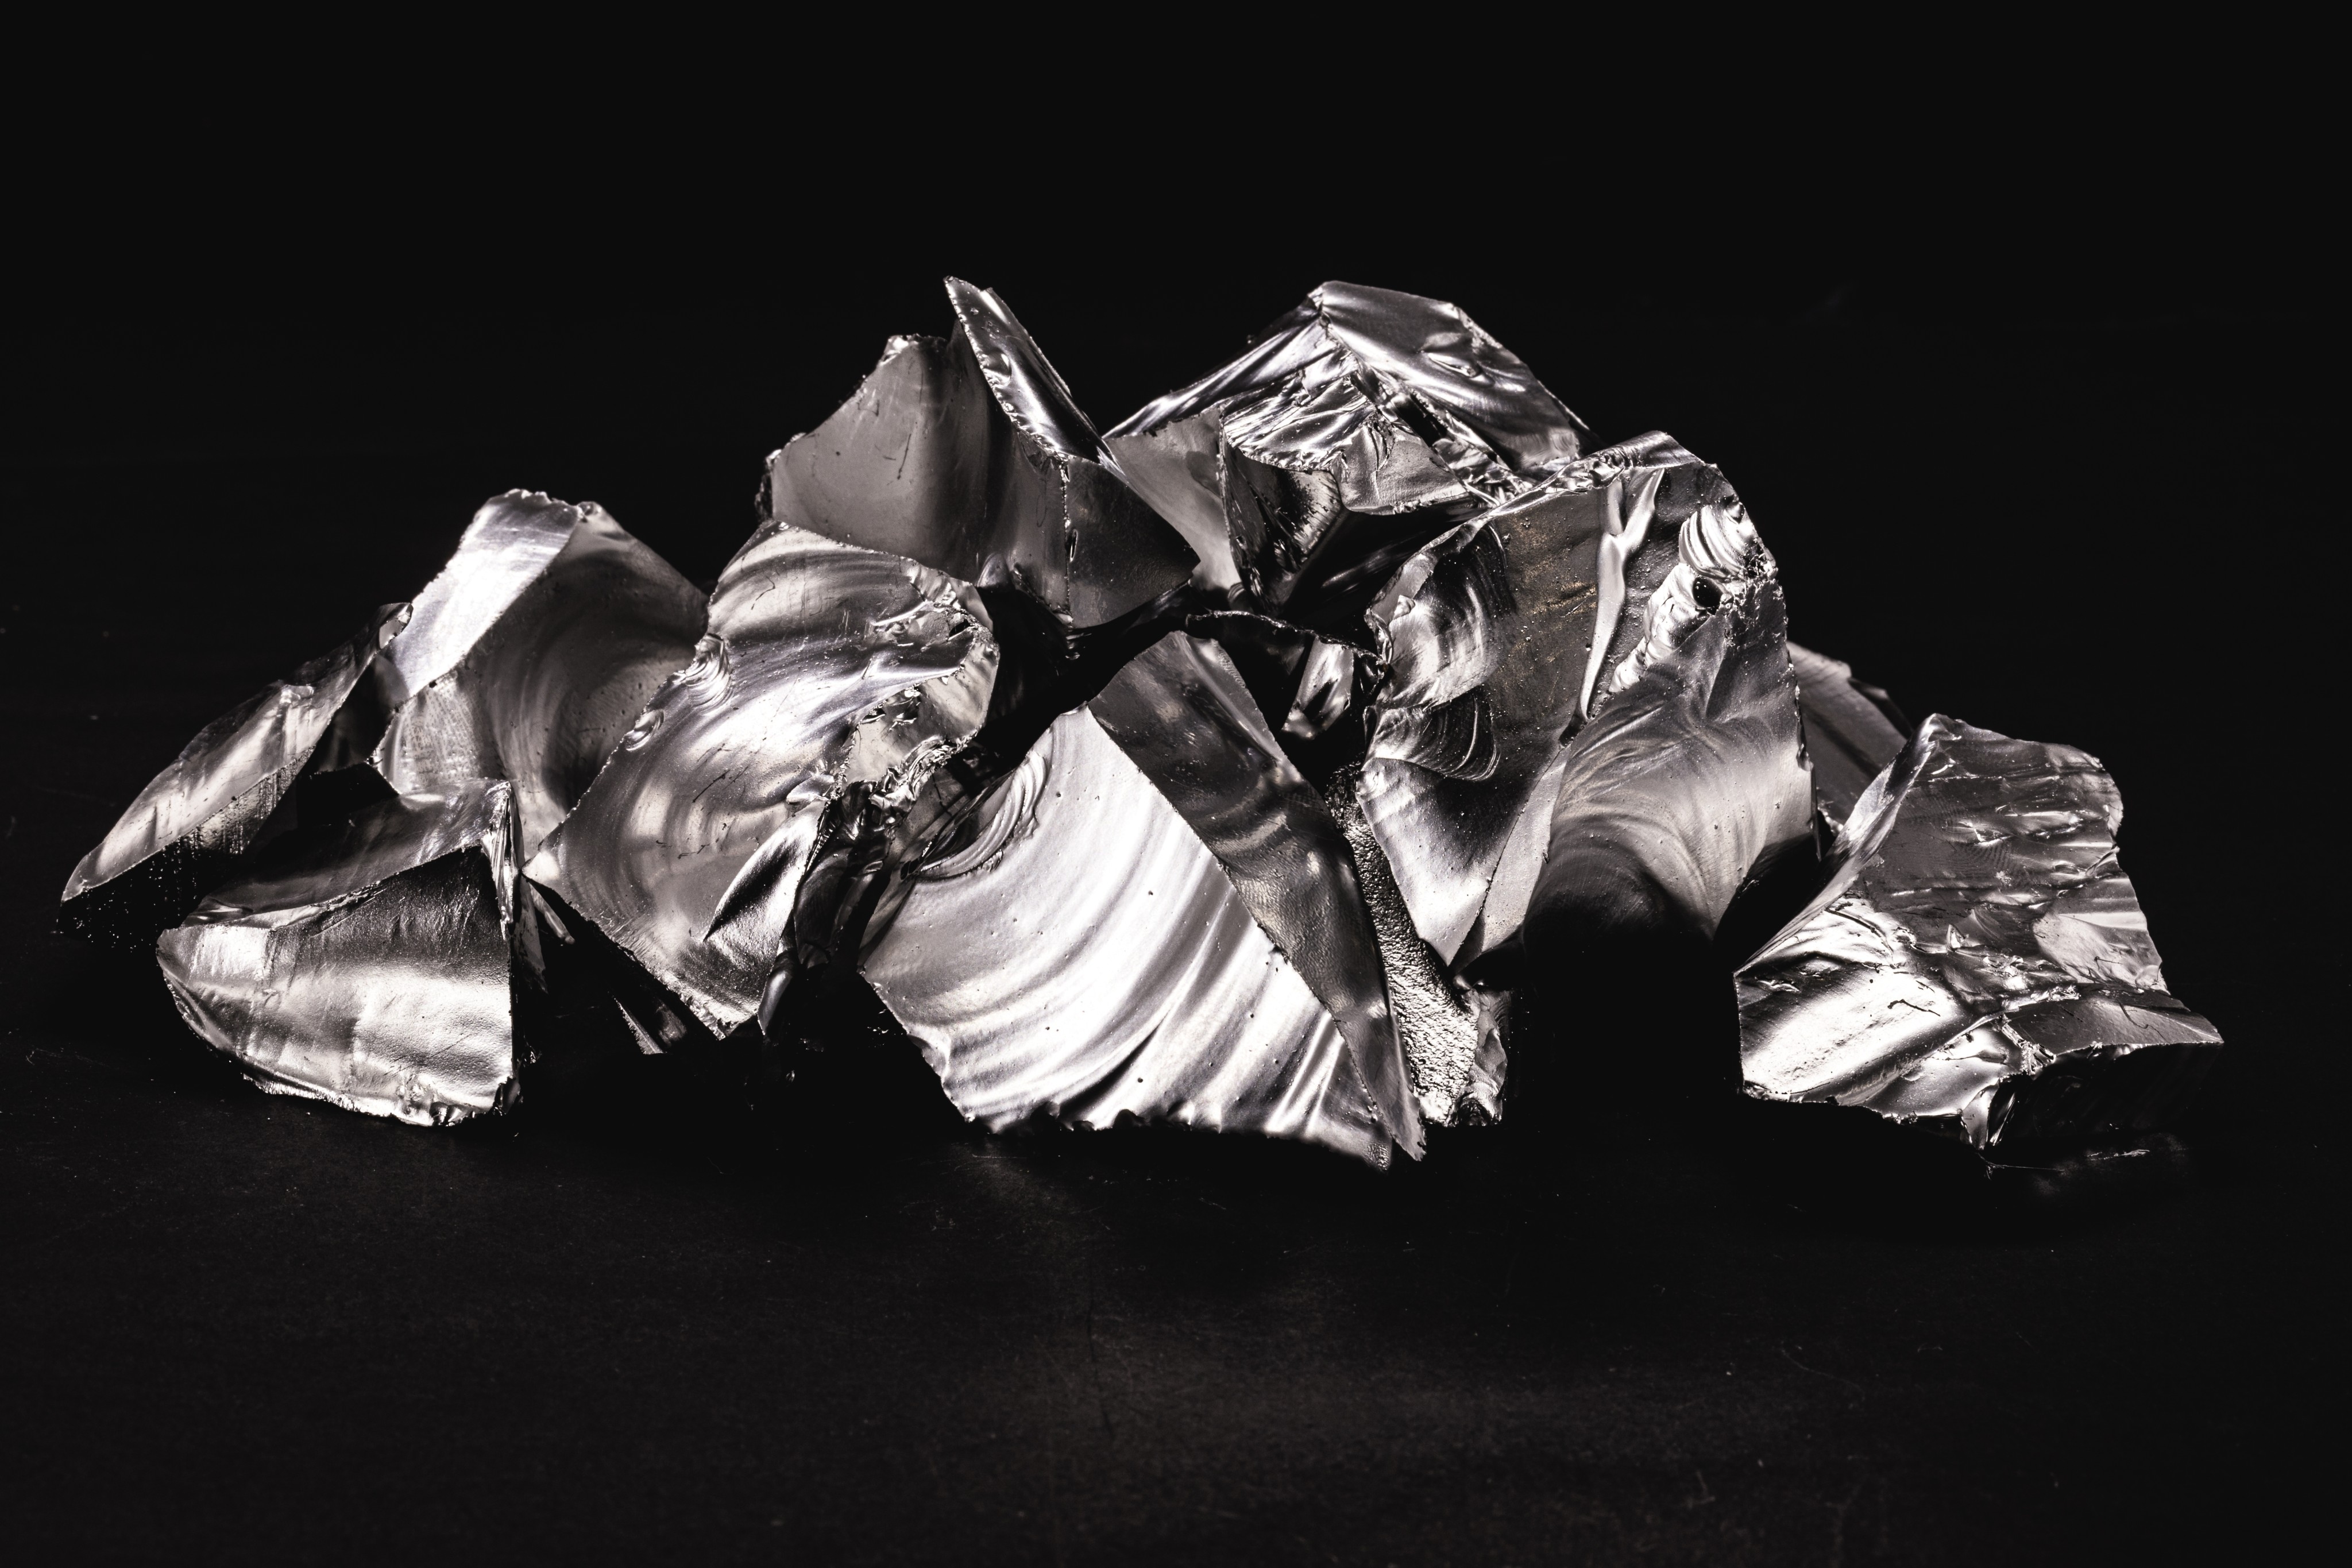 China exports of gallium and germanium surged before controls kicked in. Photo: Shutterstock  